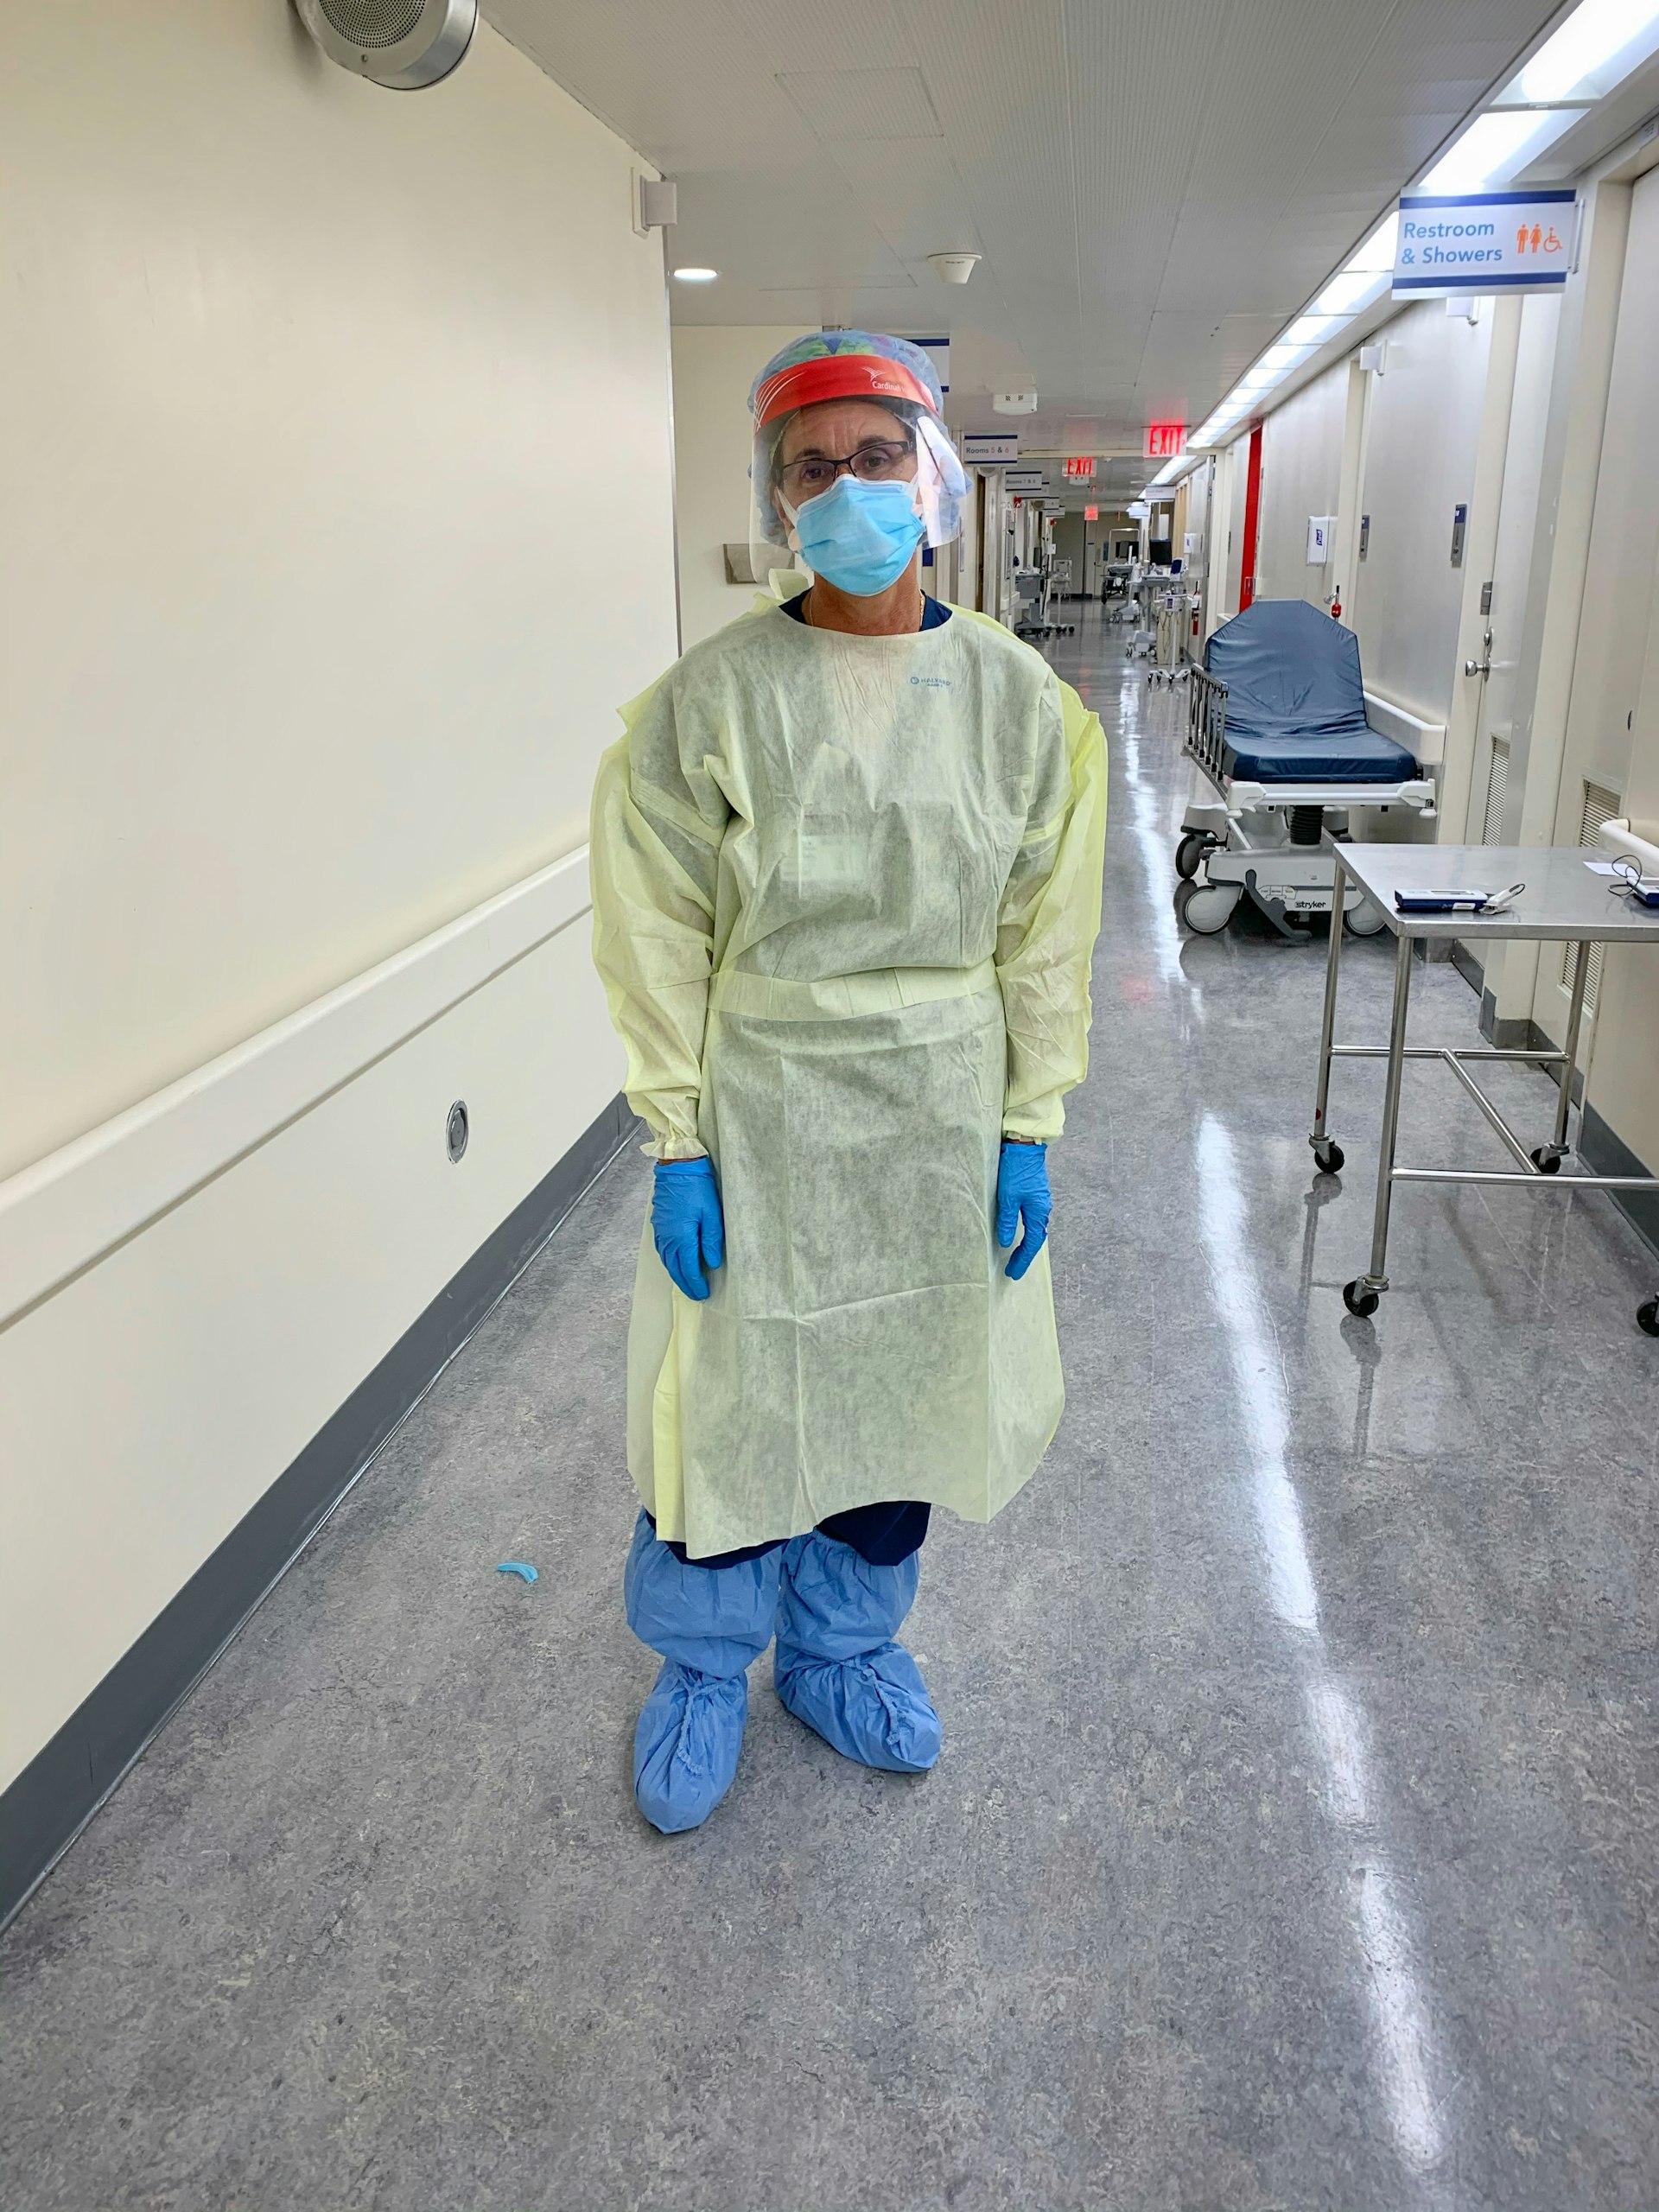 A person in full protective equipment, including a full-body gown, plastic boots over shoes, gloves, face mask and plastic visor, stands in a hospital corridor